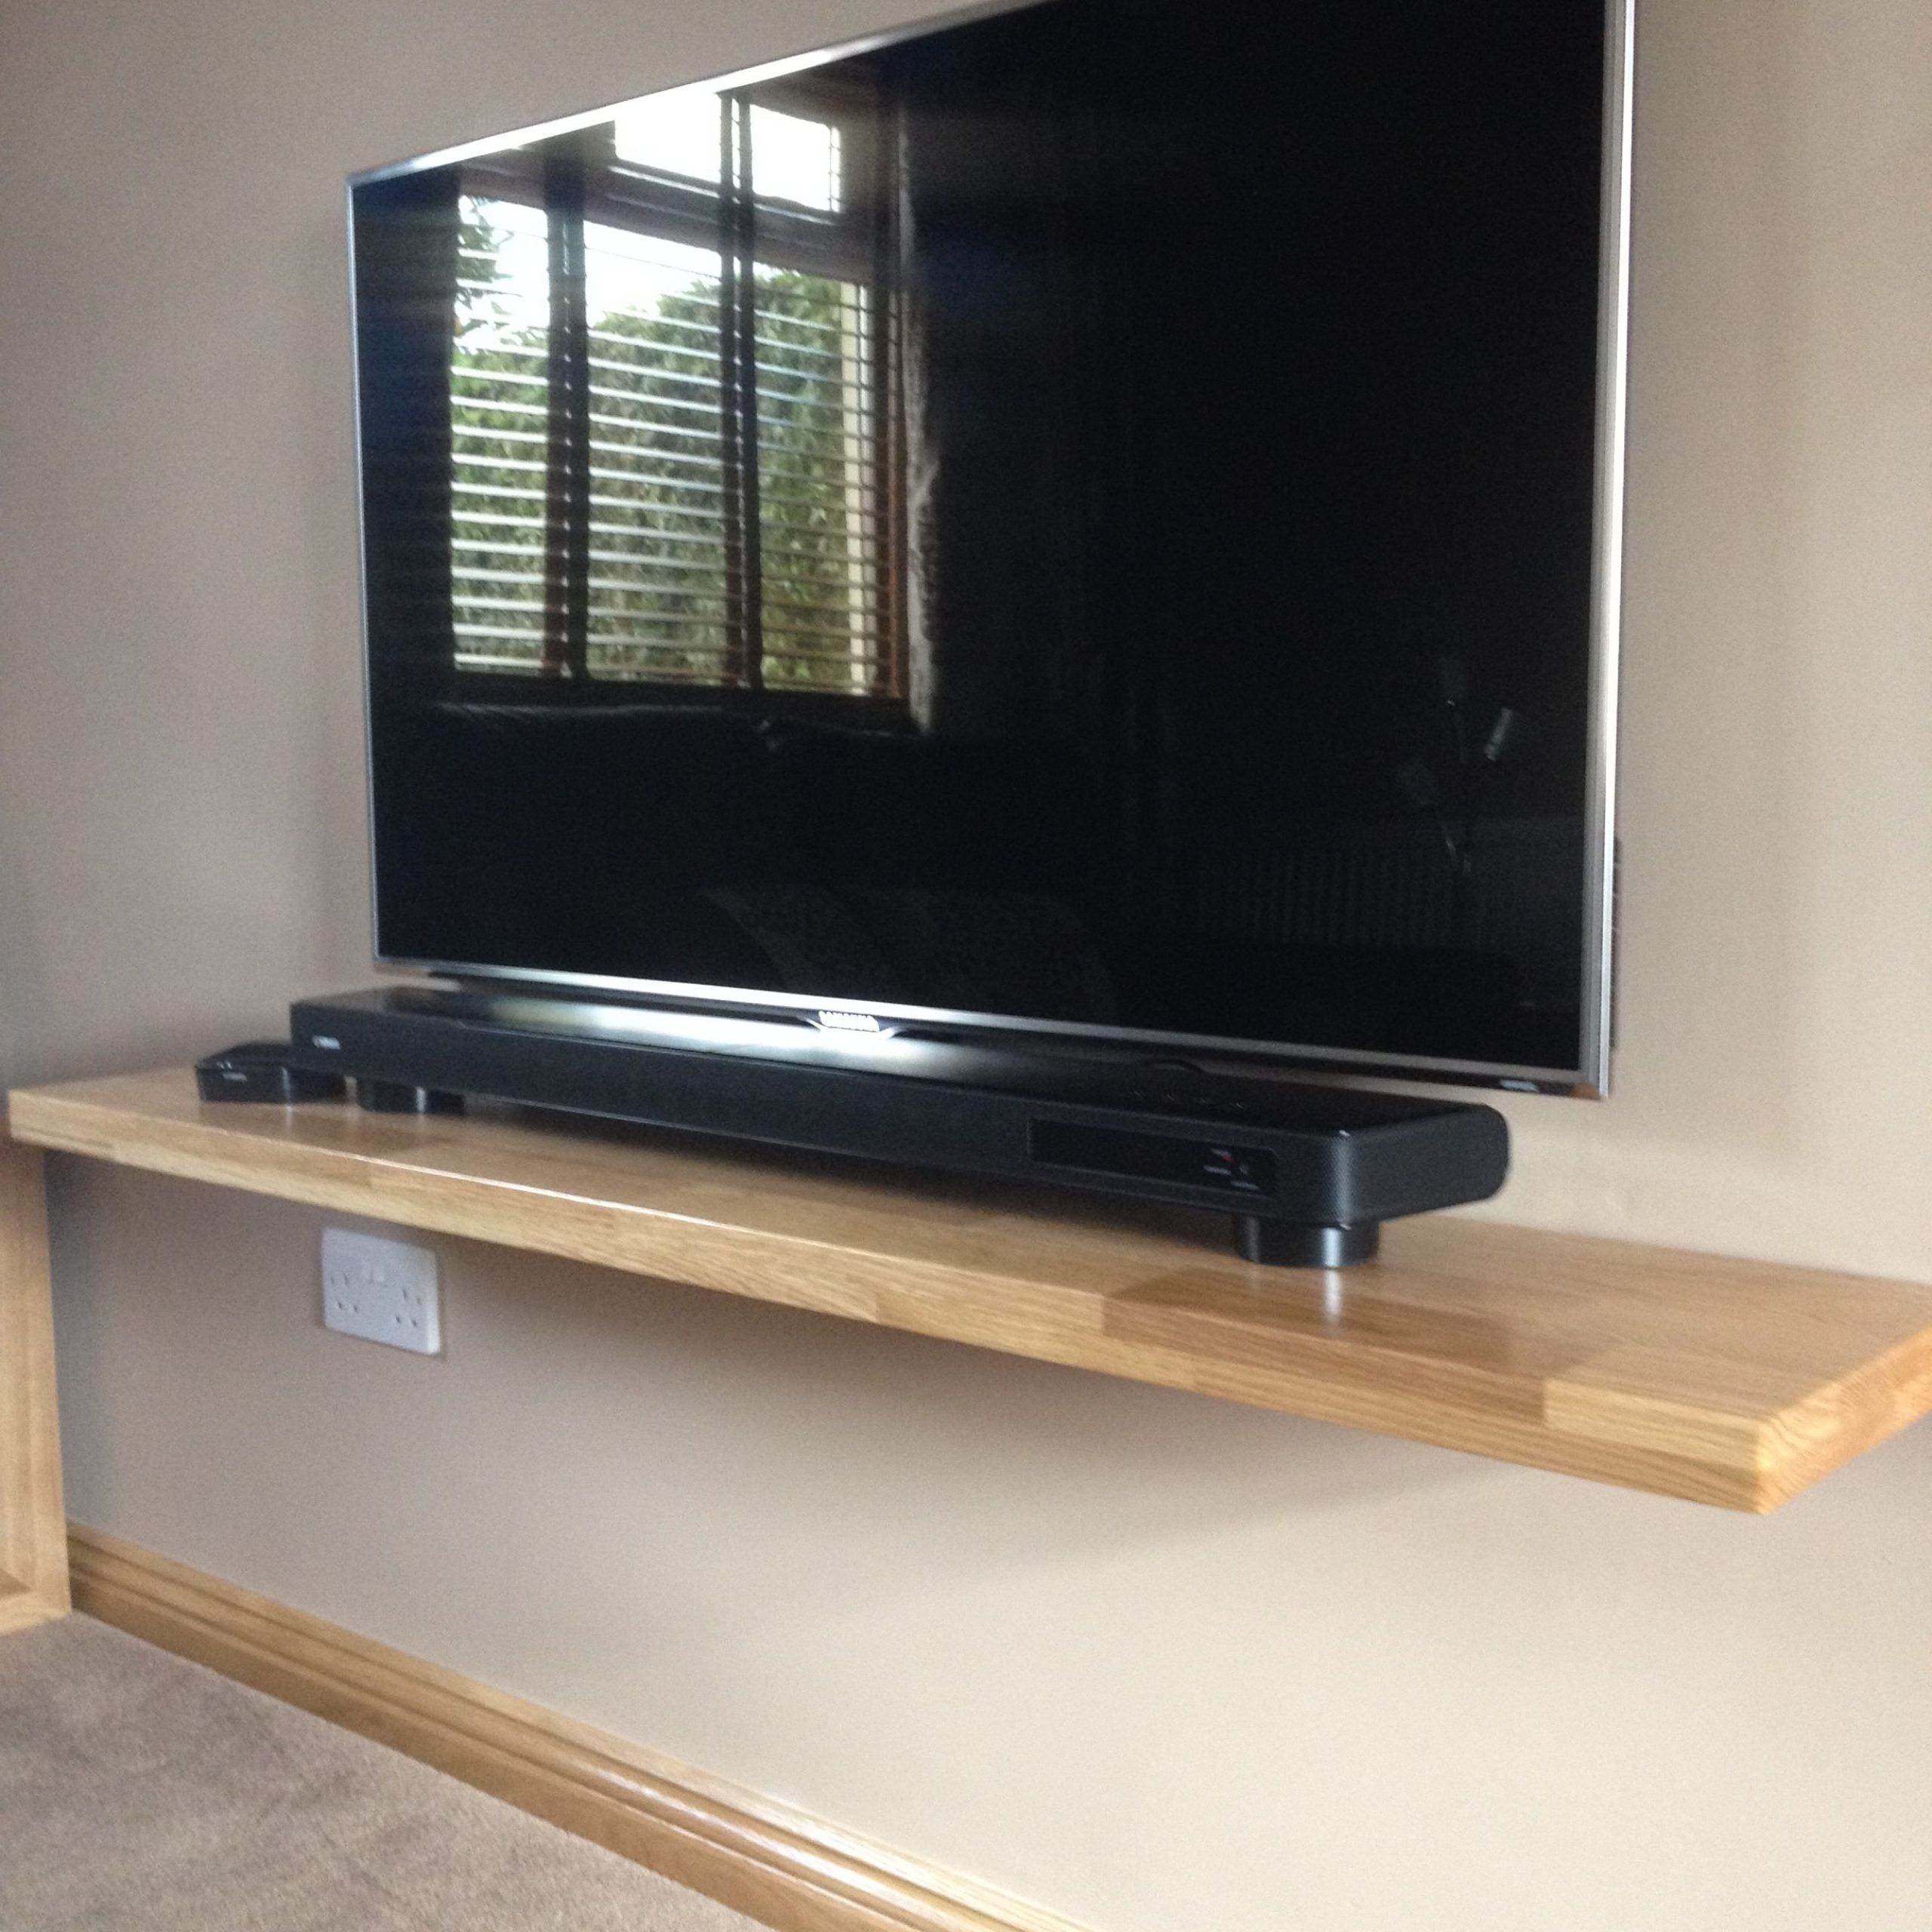 Shelf For Under Flat Screen Tv | Tyres2c With Horizontal Or Vertical Storage Shelf Tv Stands (View 13 of 15)